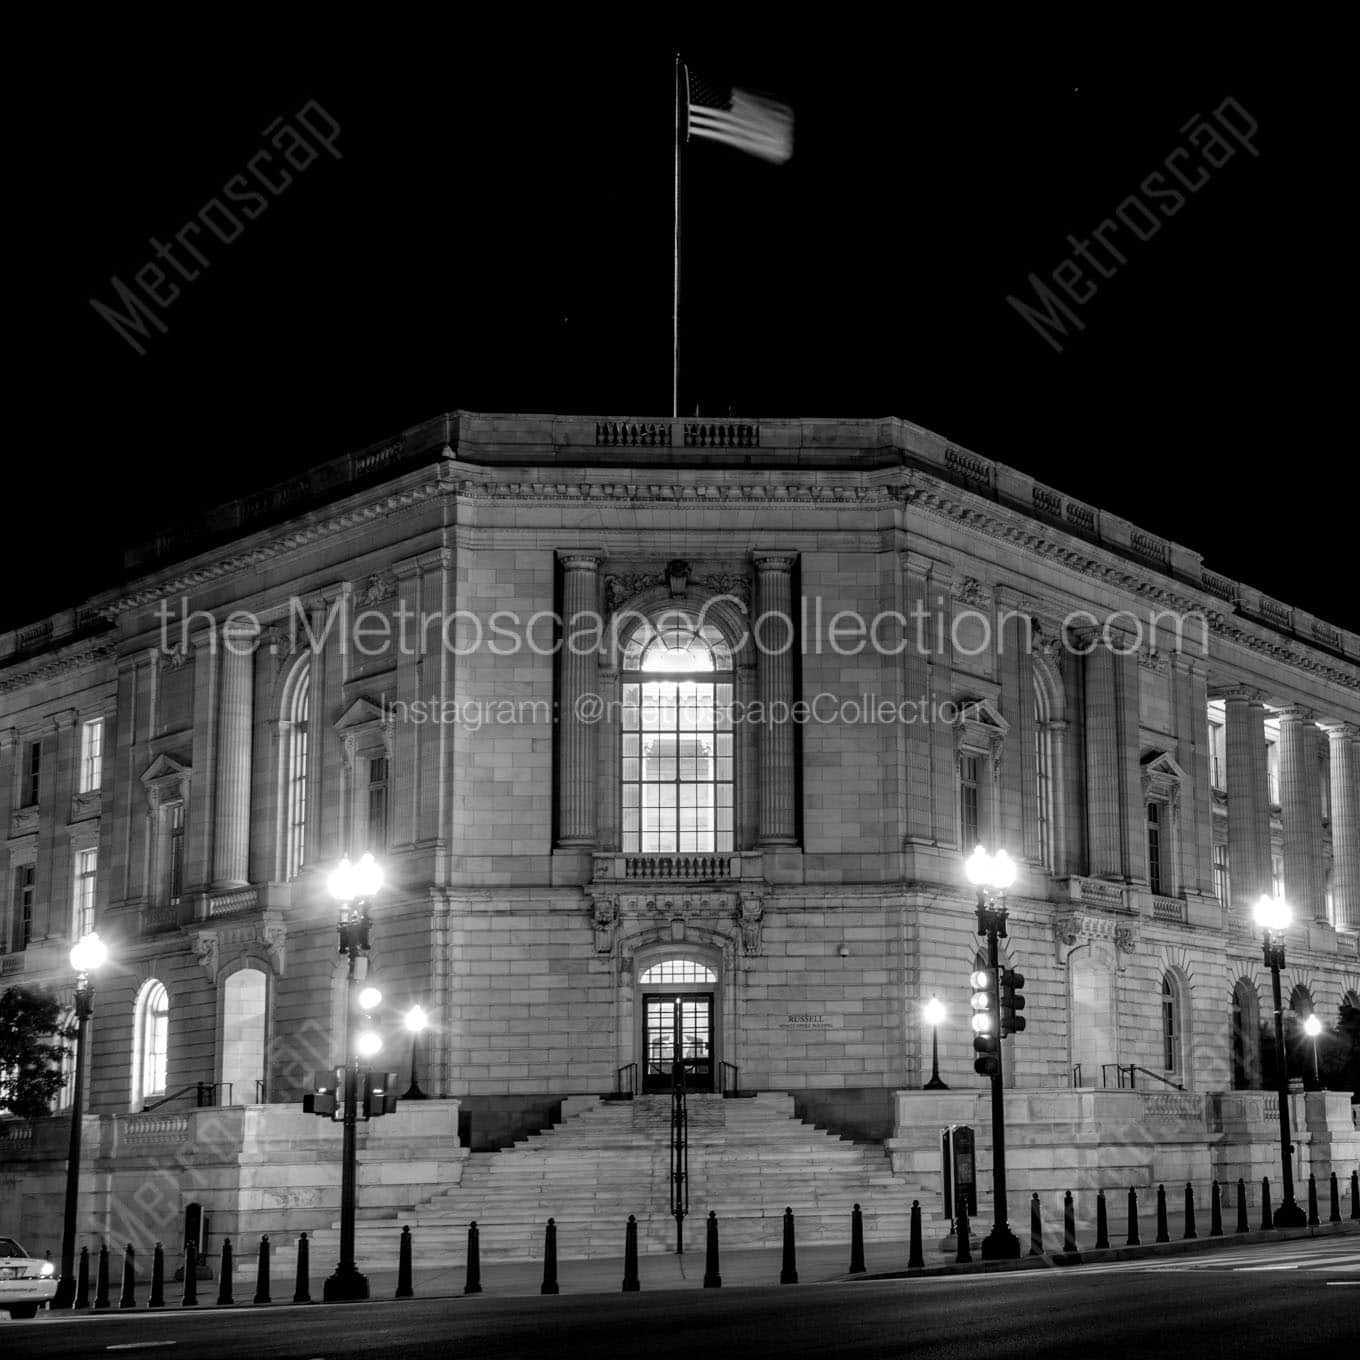 senate russell office building at night Black & White Office Art